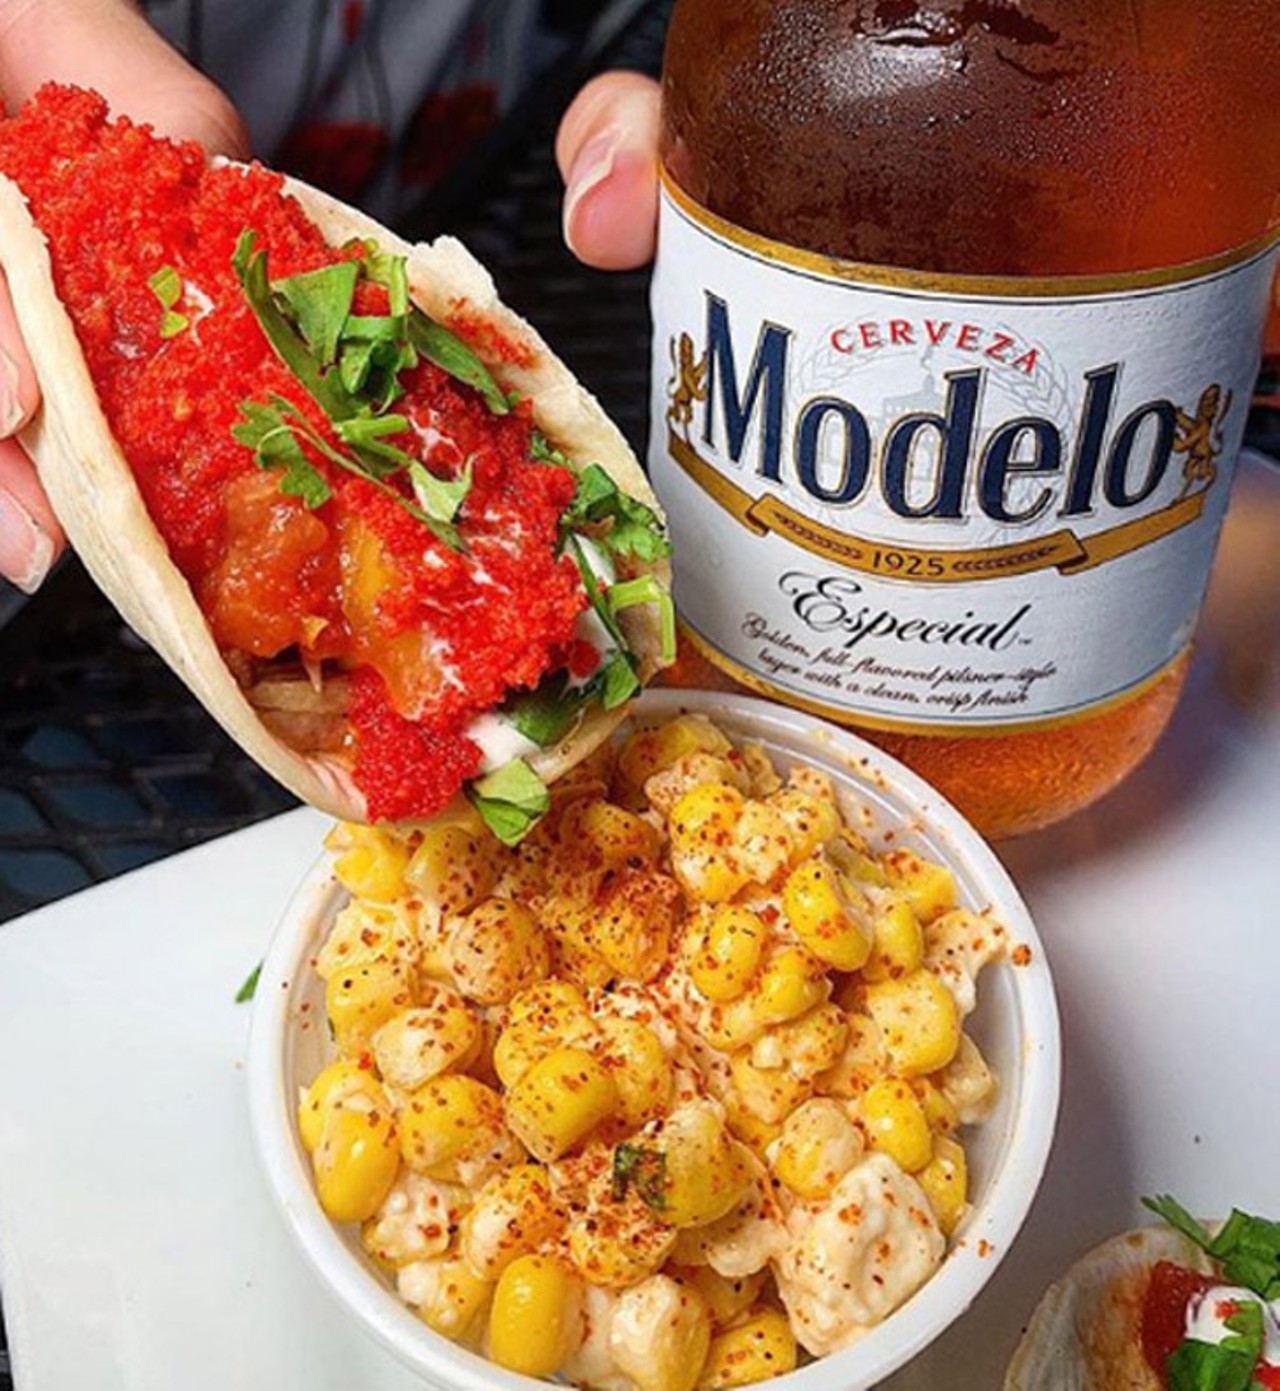 Roque Pub   
3076 Curry Ford Road, 32806, 407-985-3778
Tallboy Taco- Slow Cooked Mojo Pork, served with a mango salsa, topped with cilantro lime sour cream and a Flaming Hot Cheeto dust and fresh cilantro. Best served with a cold Modelo.
Photo via ucfbites/Instagram